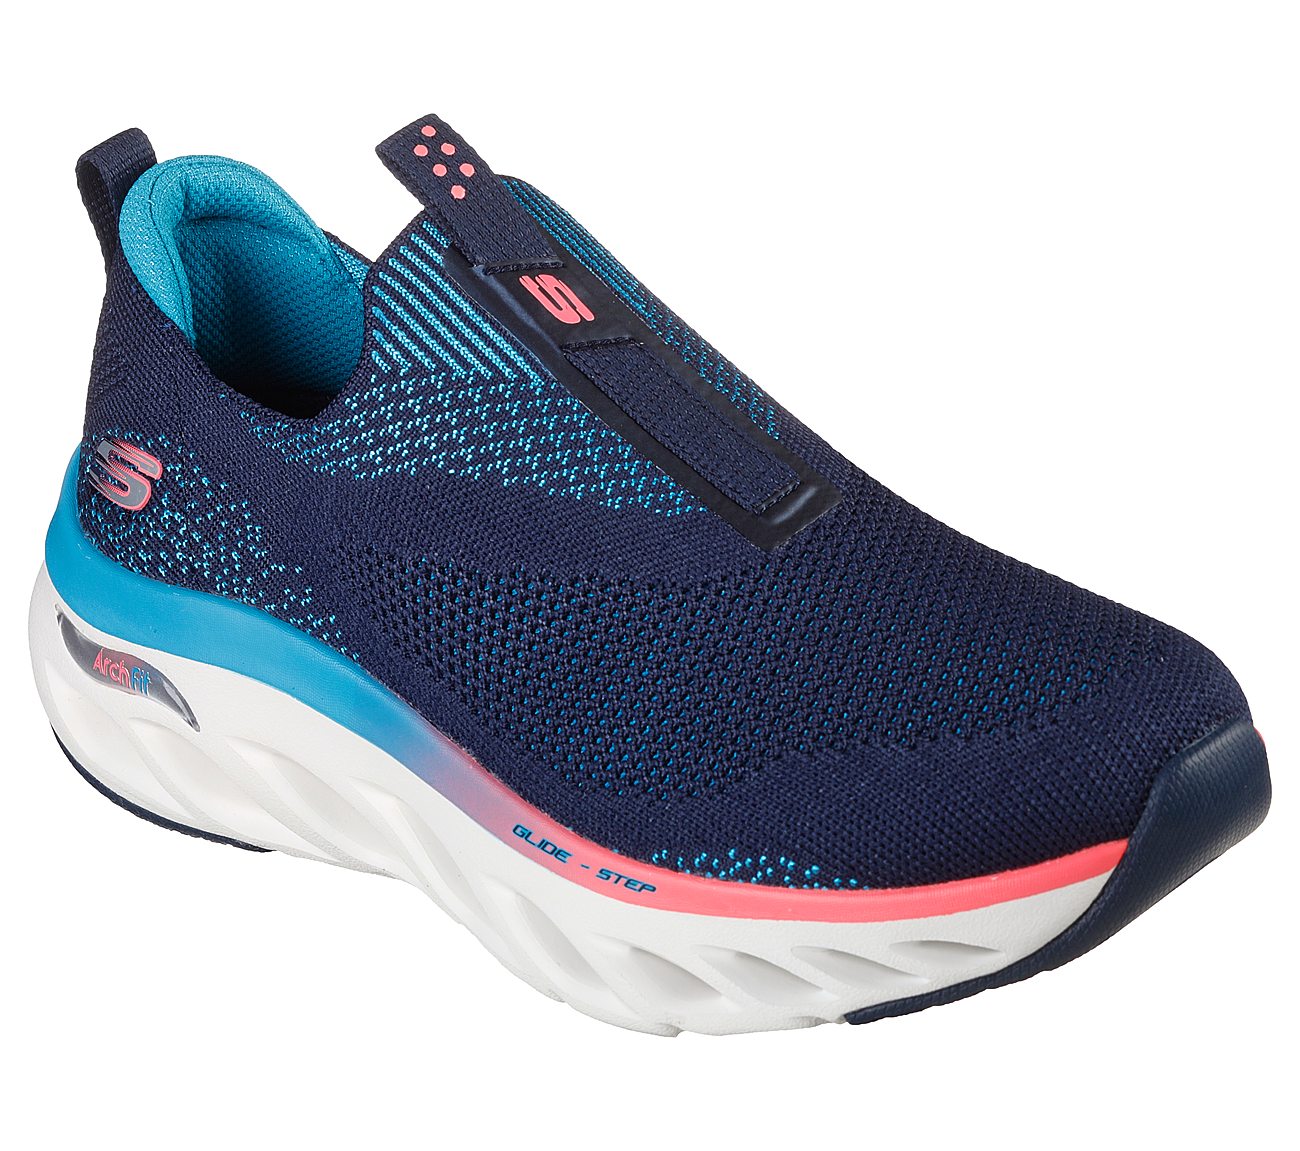 ARCH FIT GLIDE-STEP, NAVY/MULTI Footwear Lateral View